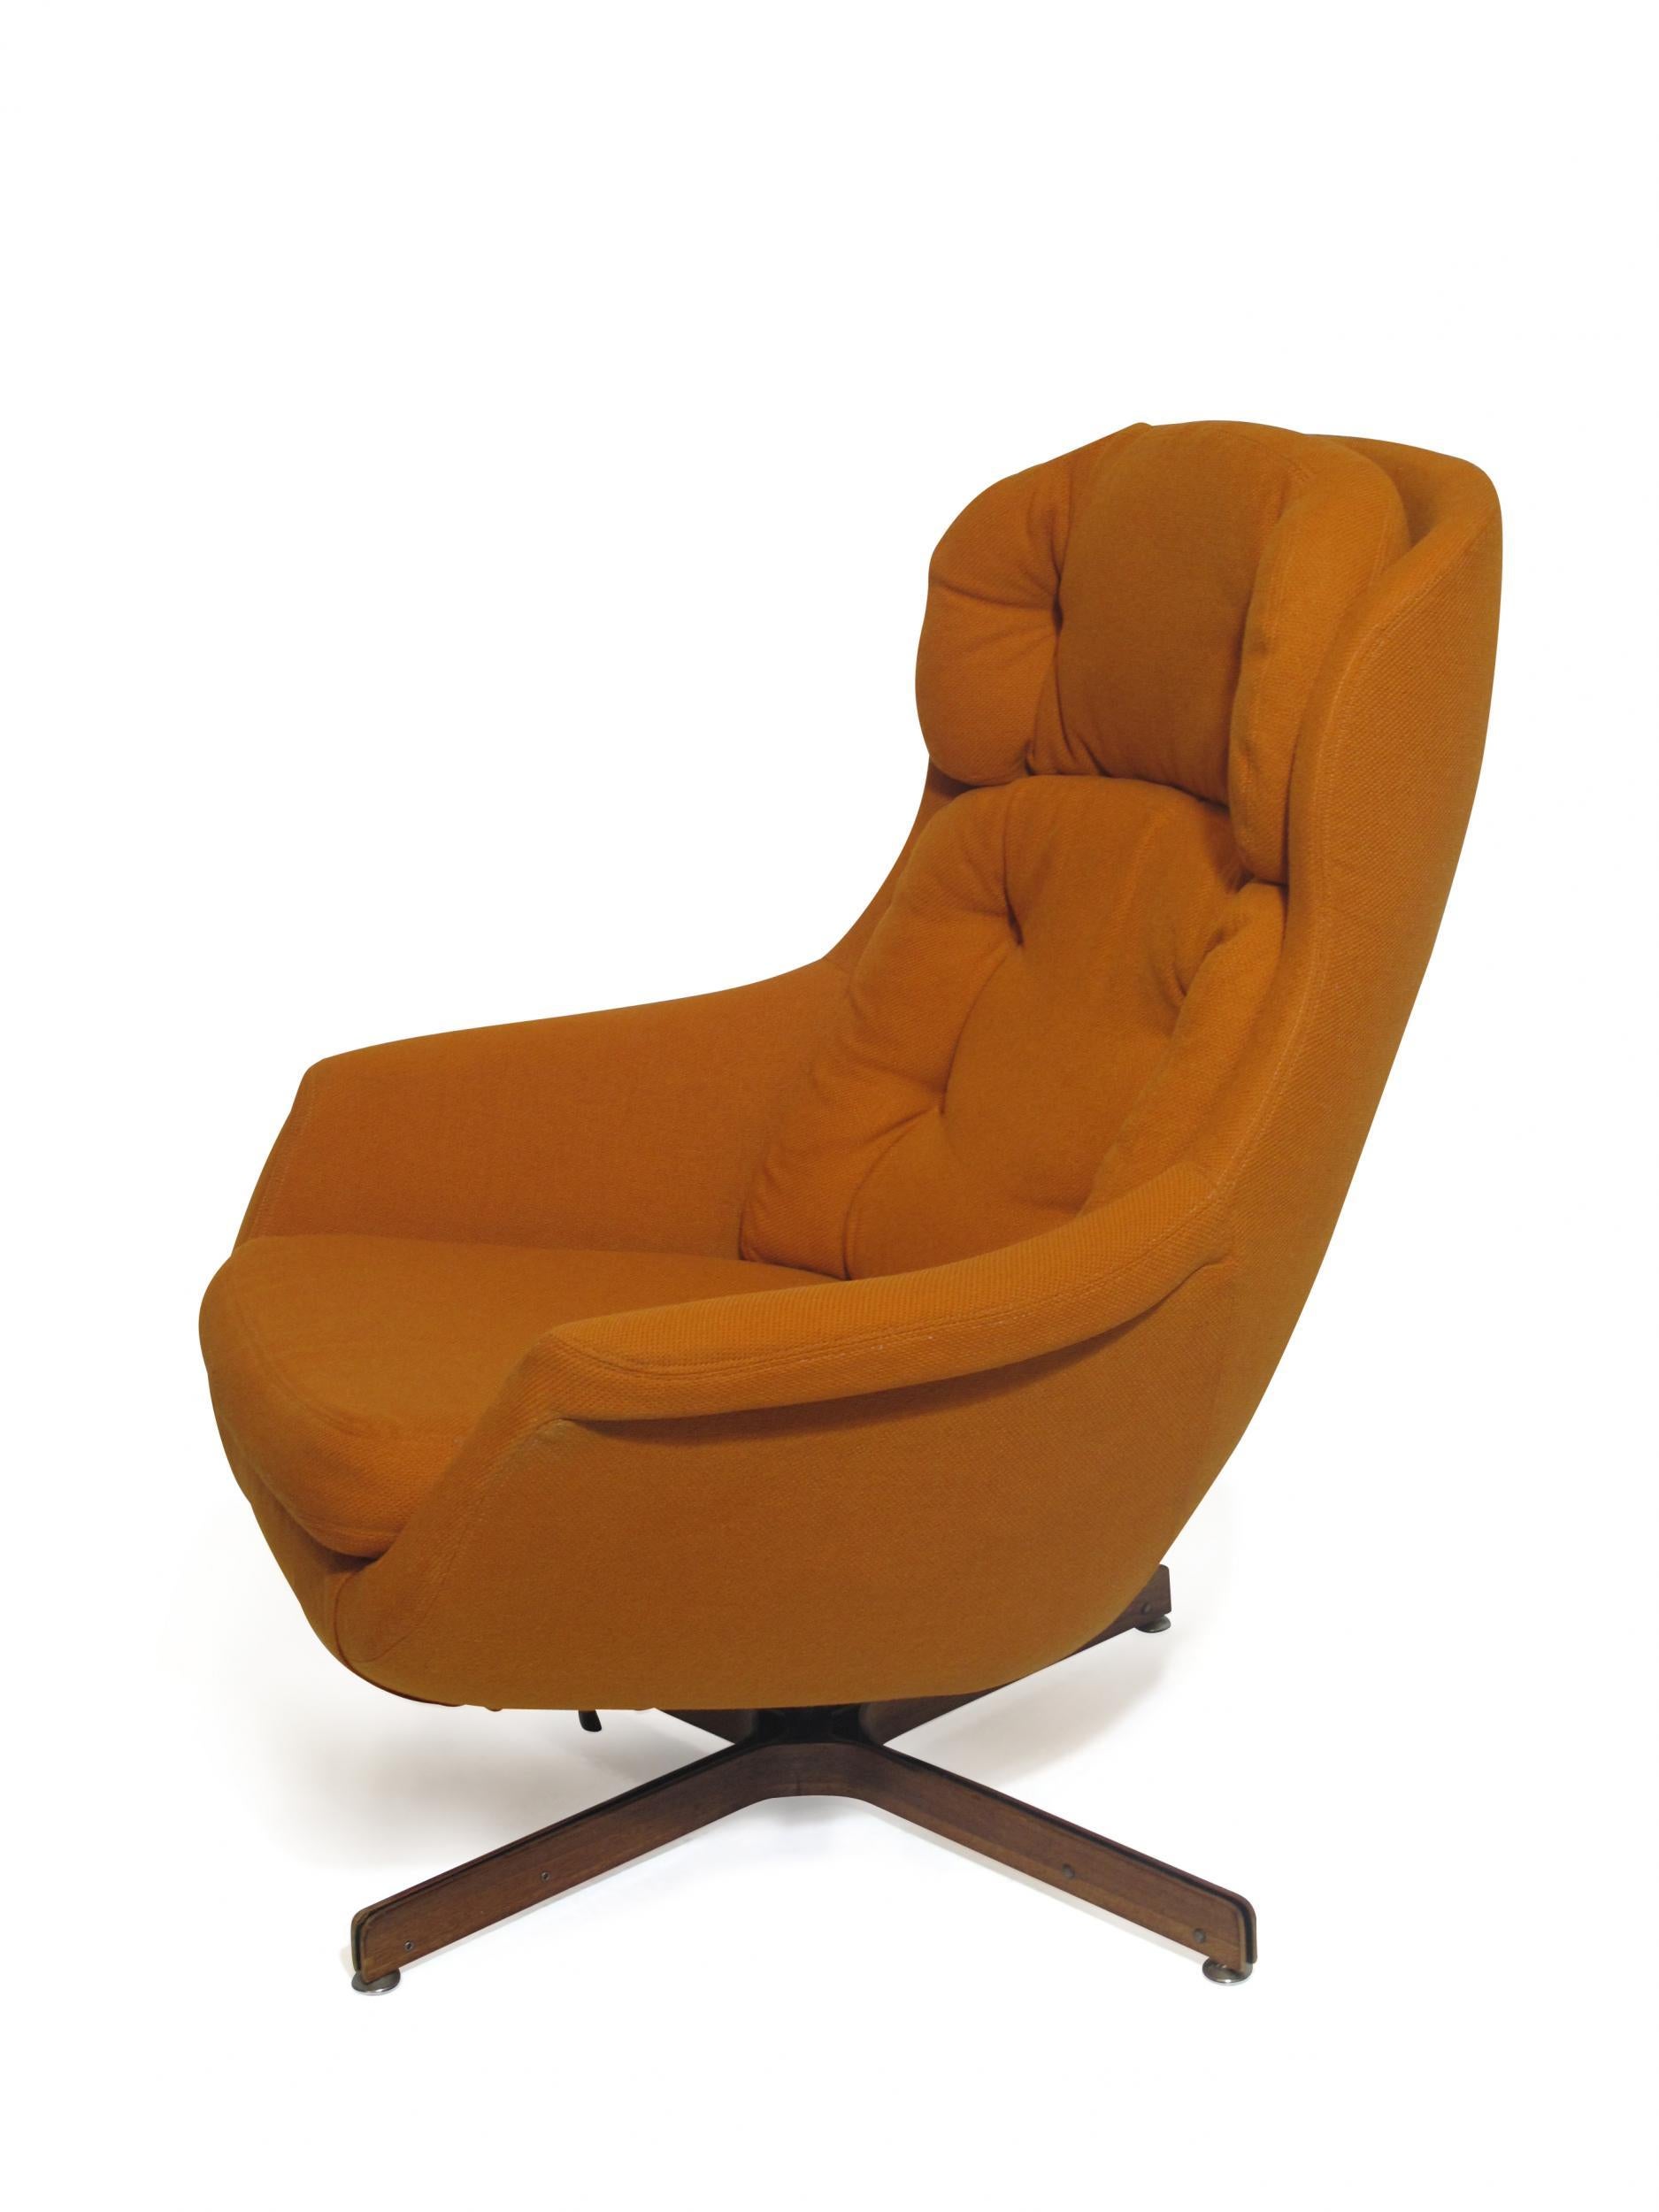 selig imperial chair